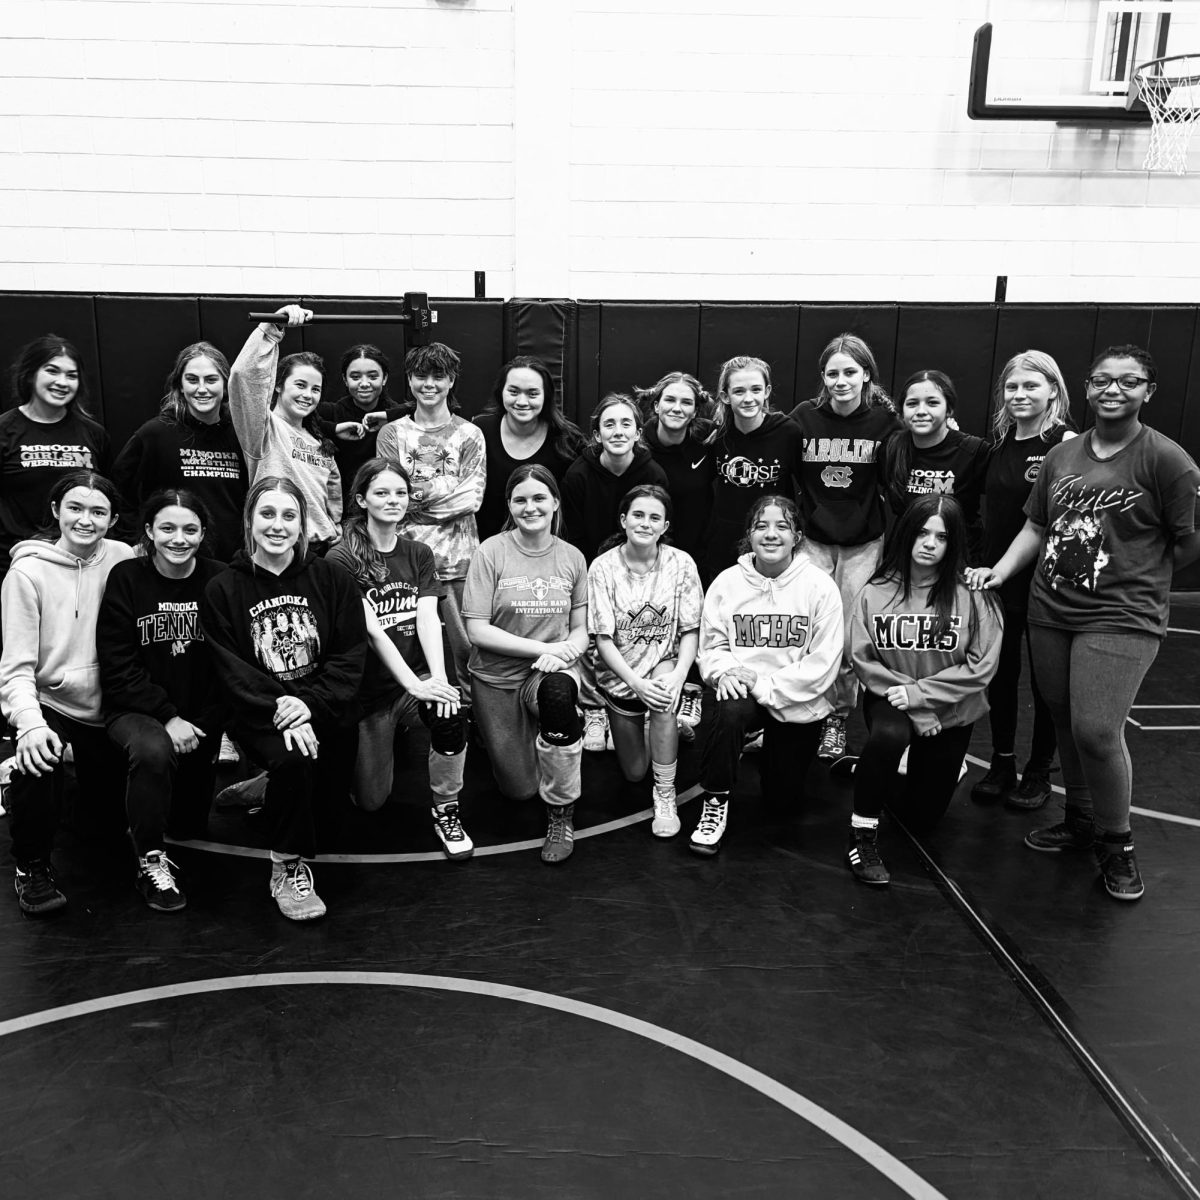 Freshmen and sophomore girls on the wrestling team take a photo after practice on Dec. 7.